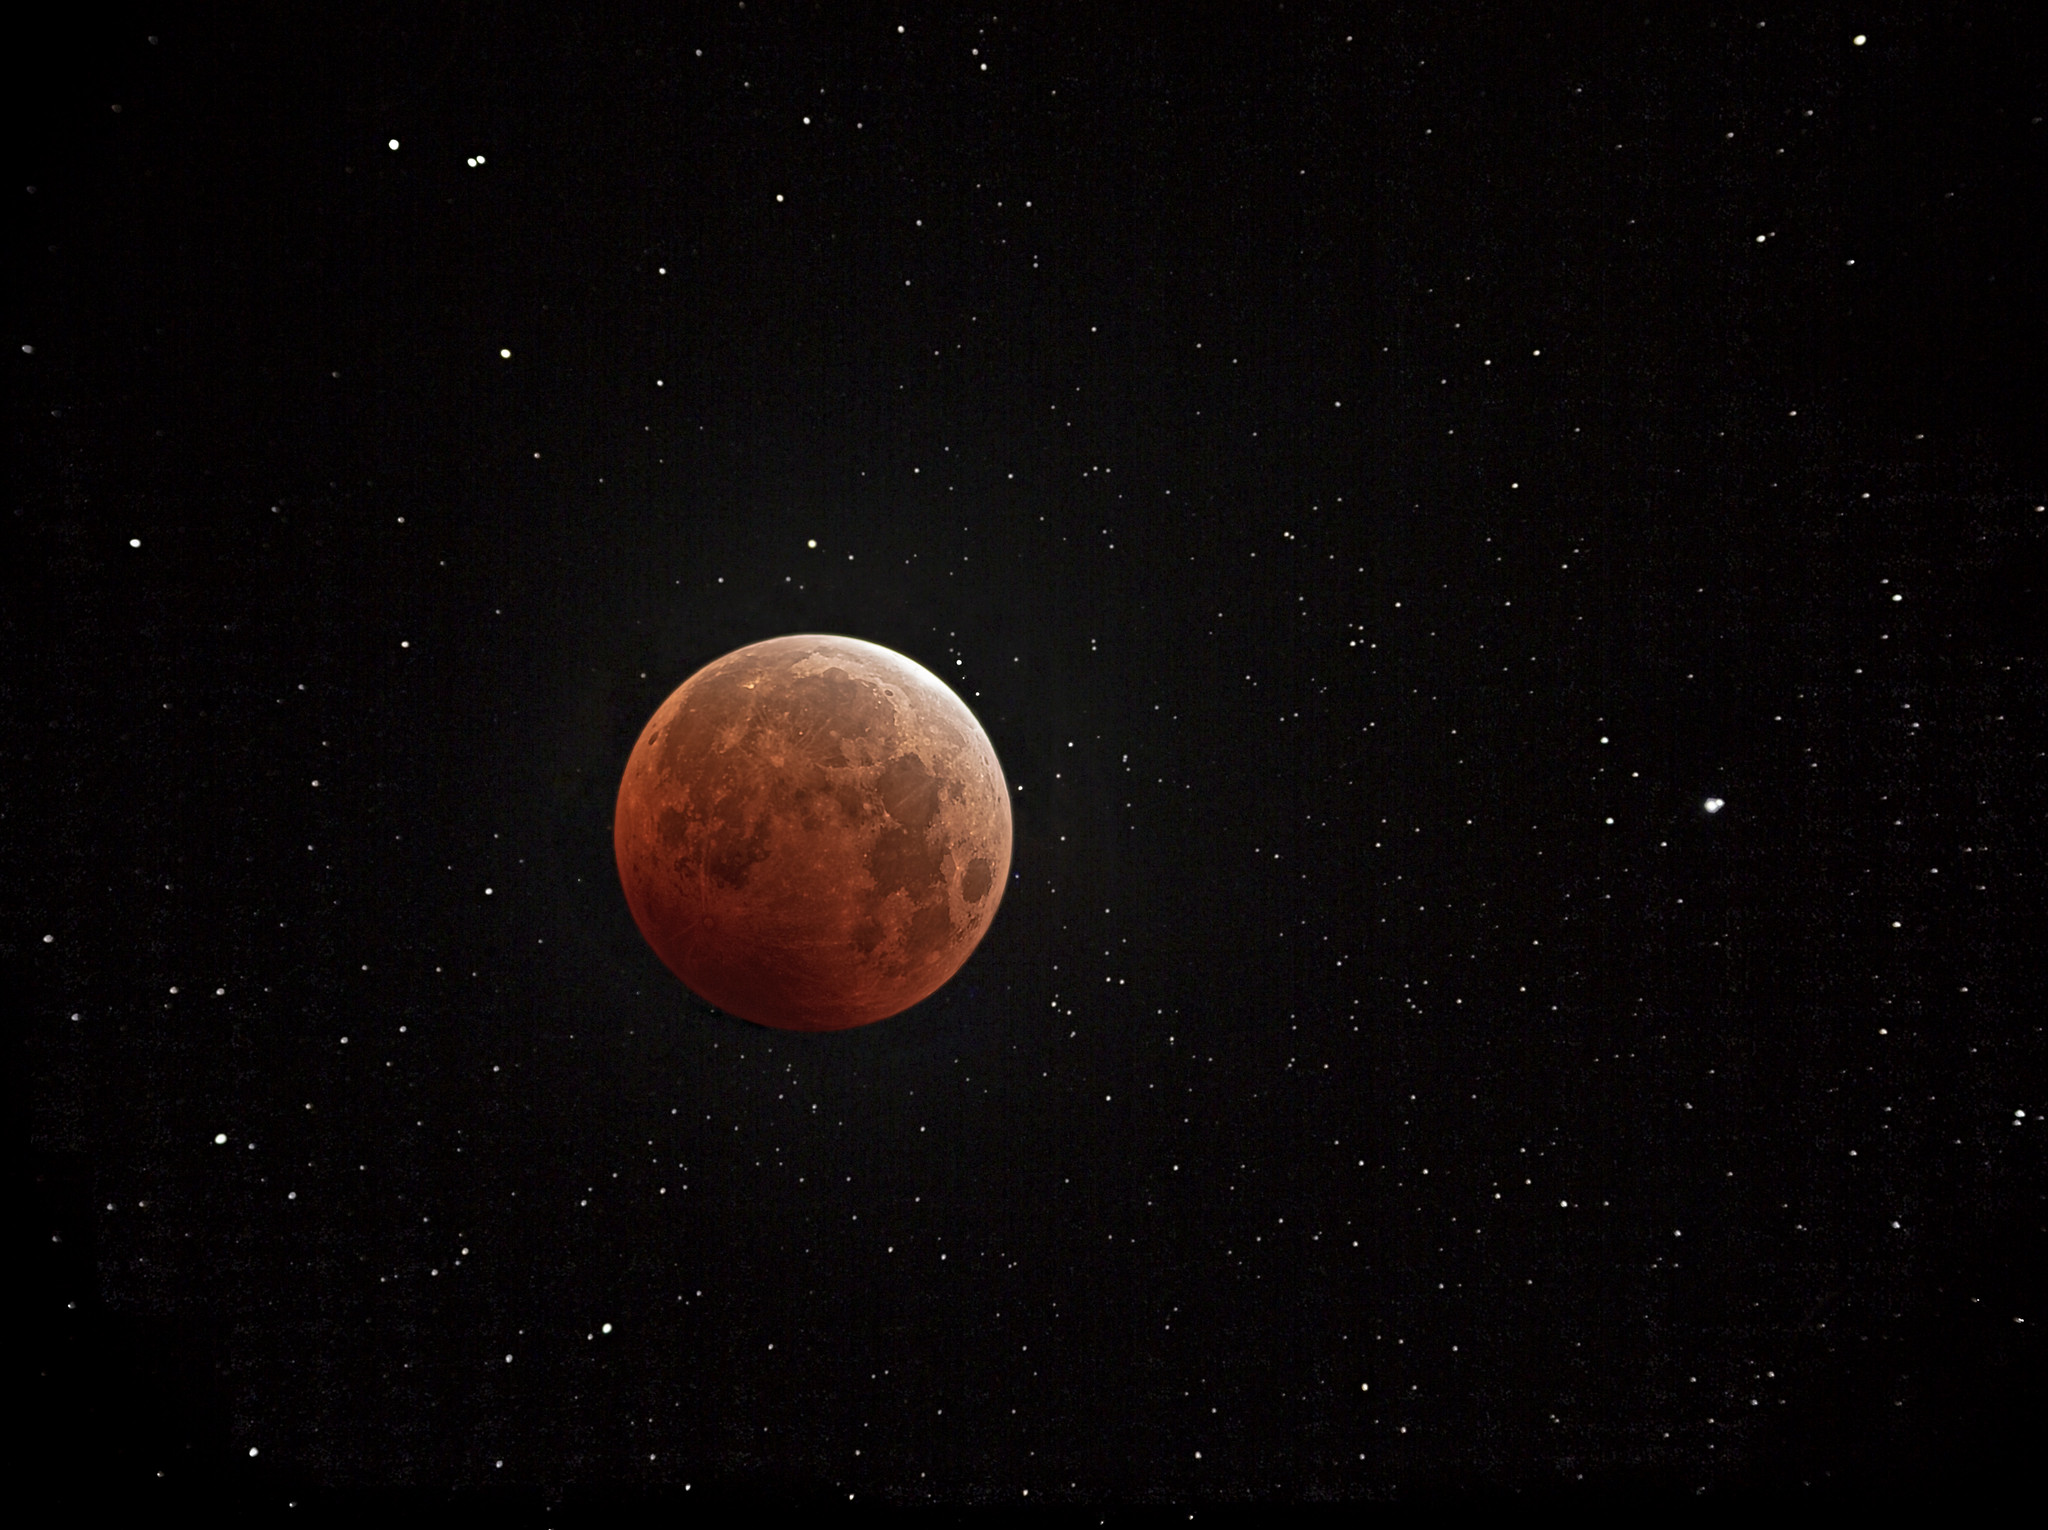 supermoon and total lunar eclipse from May 2021